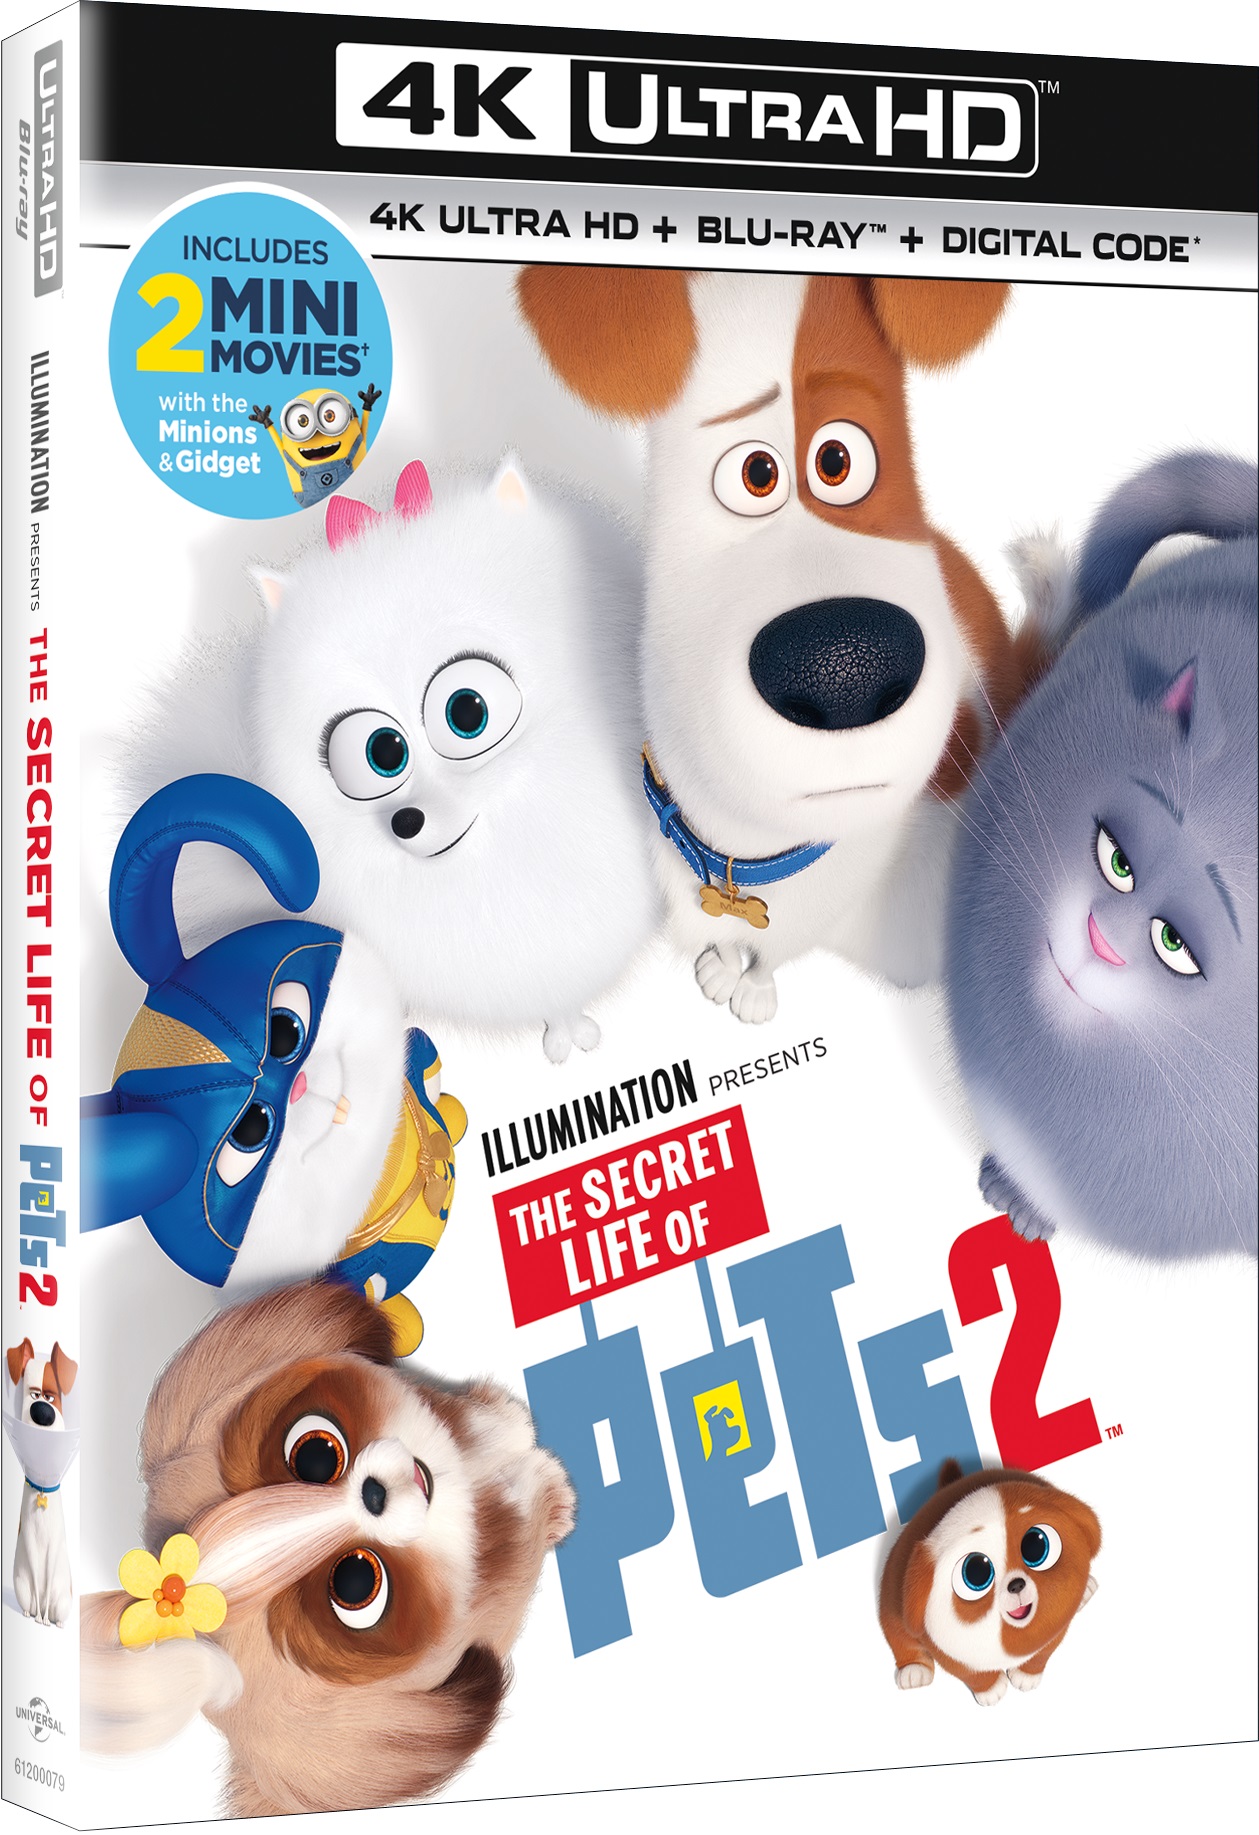 'The Secret Life Of Pets 2'; Arrives On Digital August 13 & On 4K Ultra HD, Blu-ray & DVD August 27, 2019 From Illumination & Universal 5